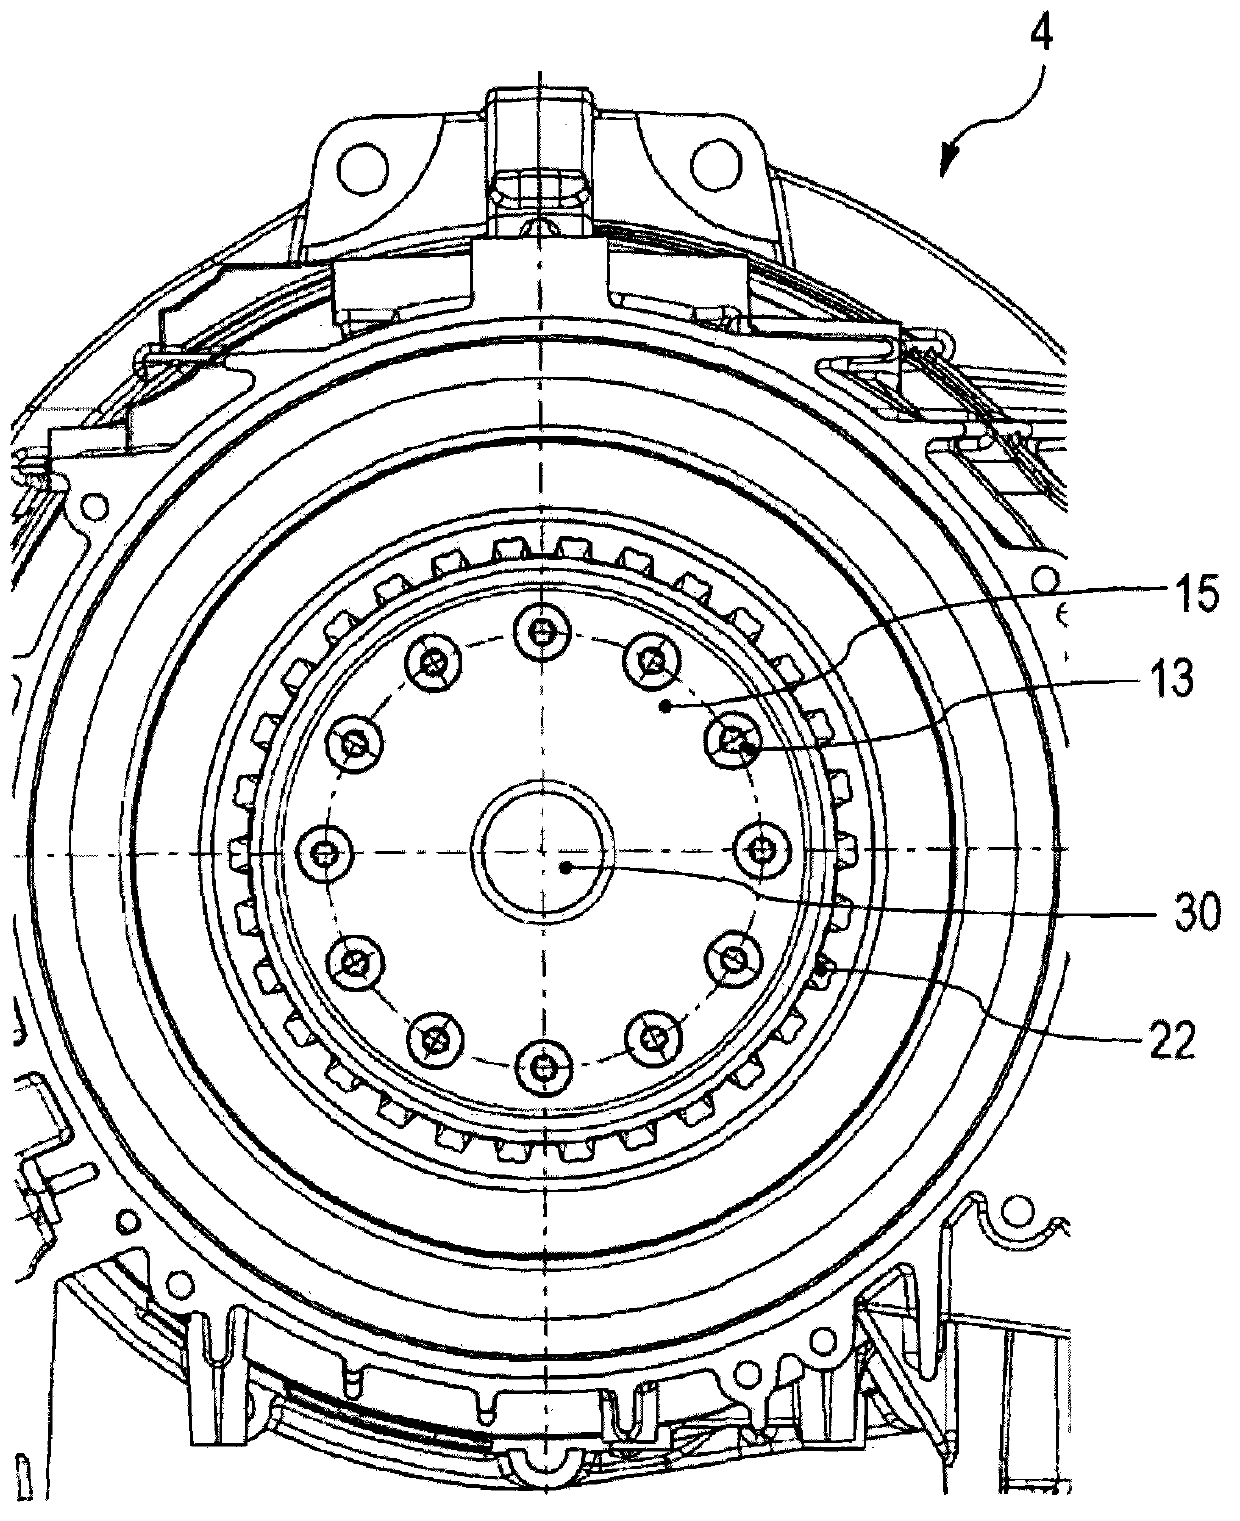 A torque transfer device connected with a torque converter with the aid of gear engagement